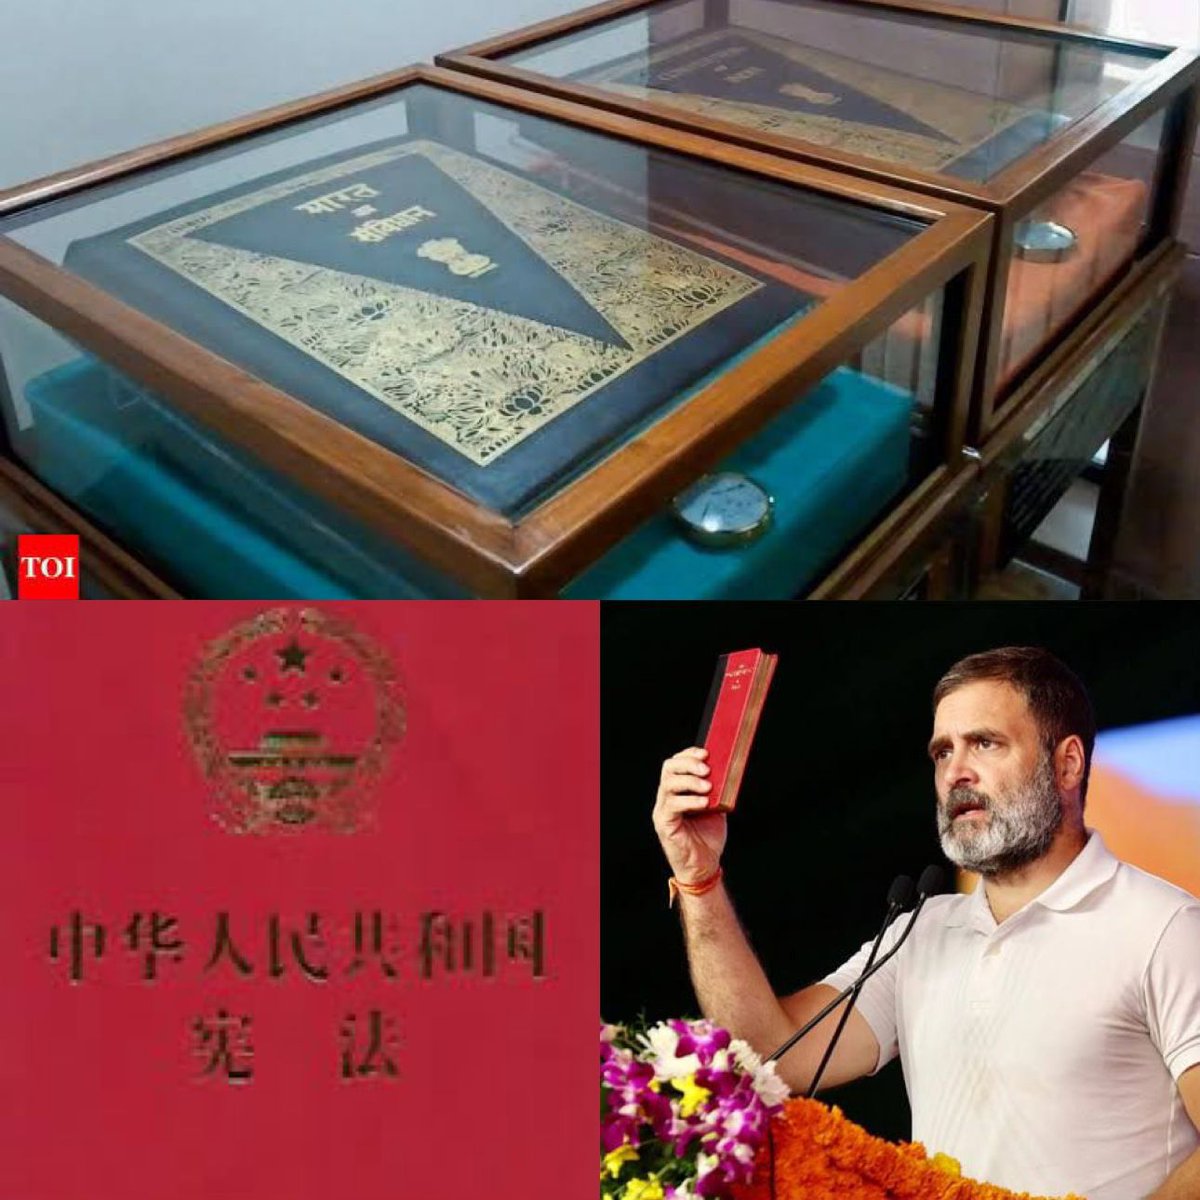 The original copy of the Constitution of India has a blue cover . The original Chinese constitution has a red cover. Does Rahul carry a Chinese Constitution? We will need to verify.